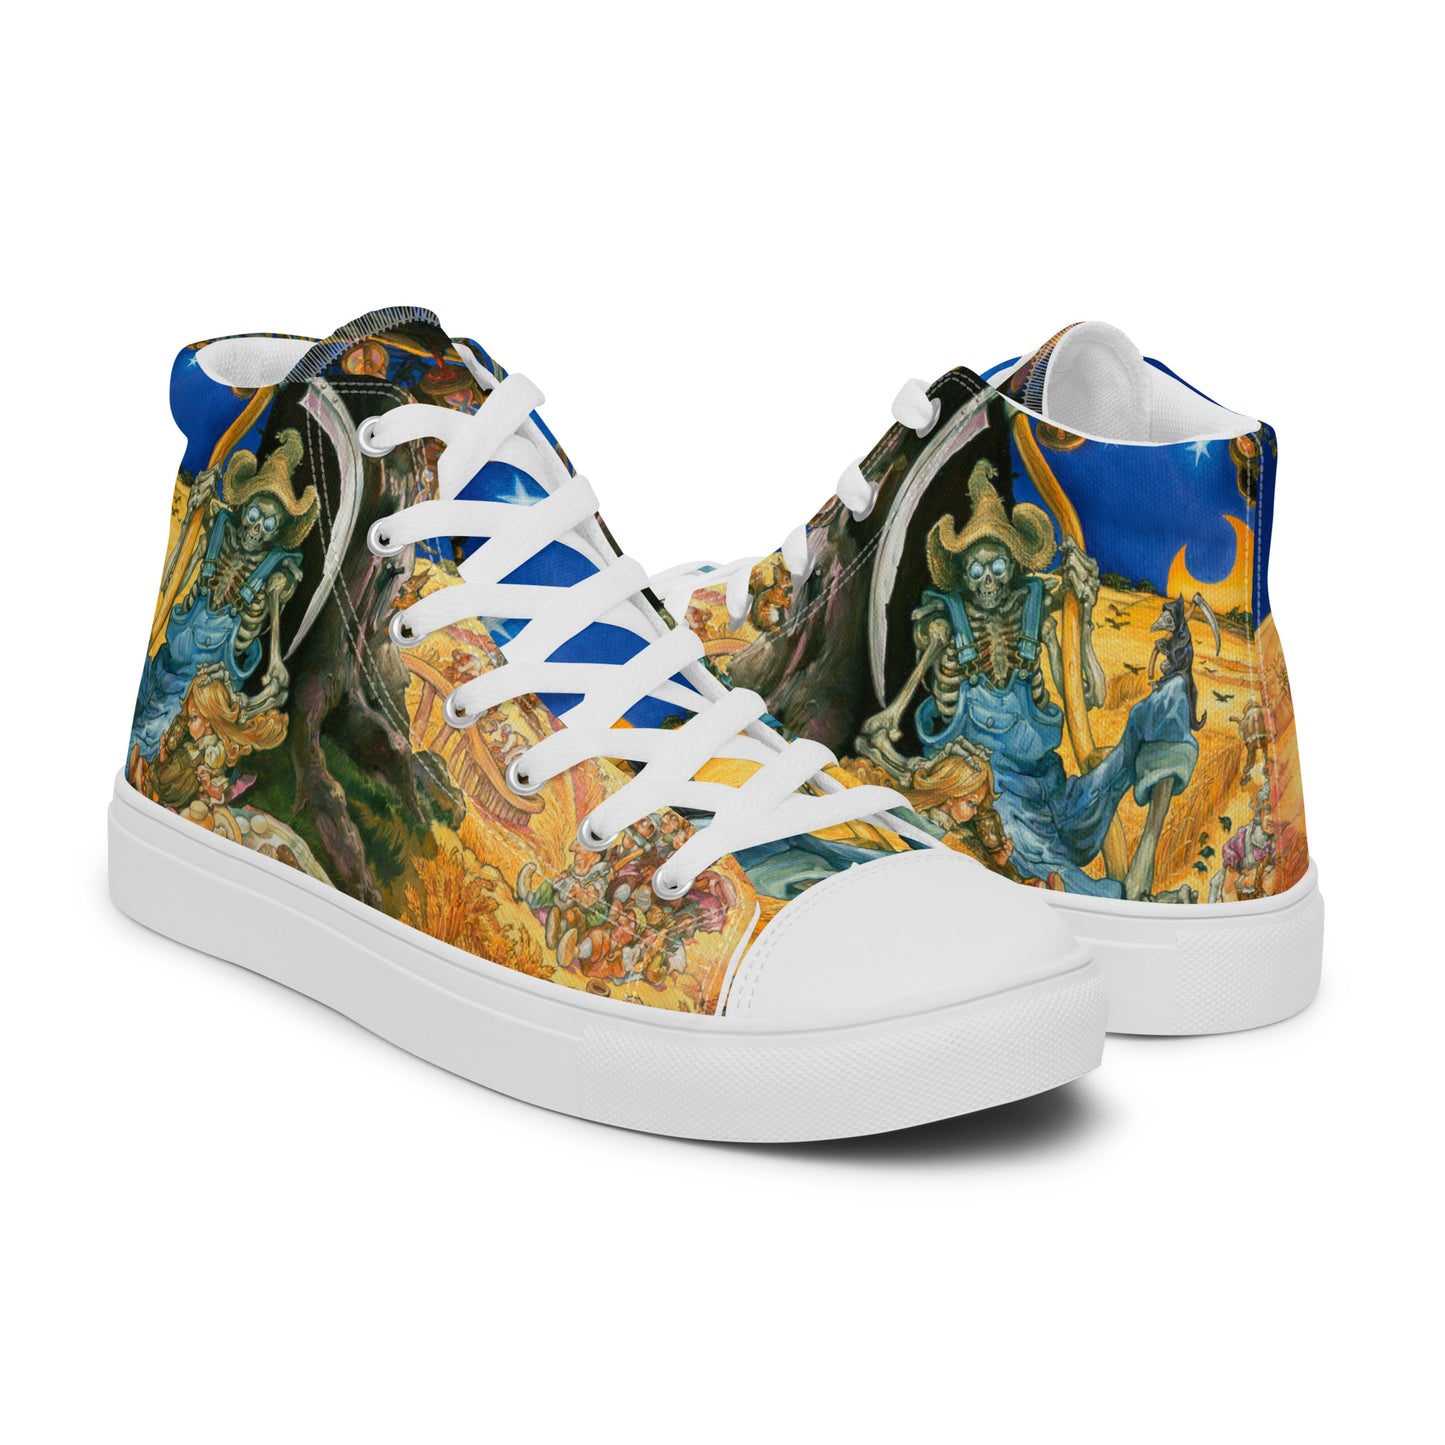 Reaper Man Men’s high top canvas shoes - Free shipping! *US SIZES SHOWN! USE CHART!